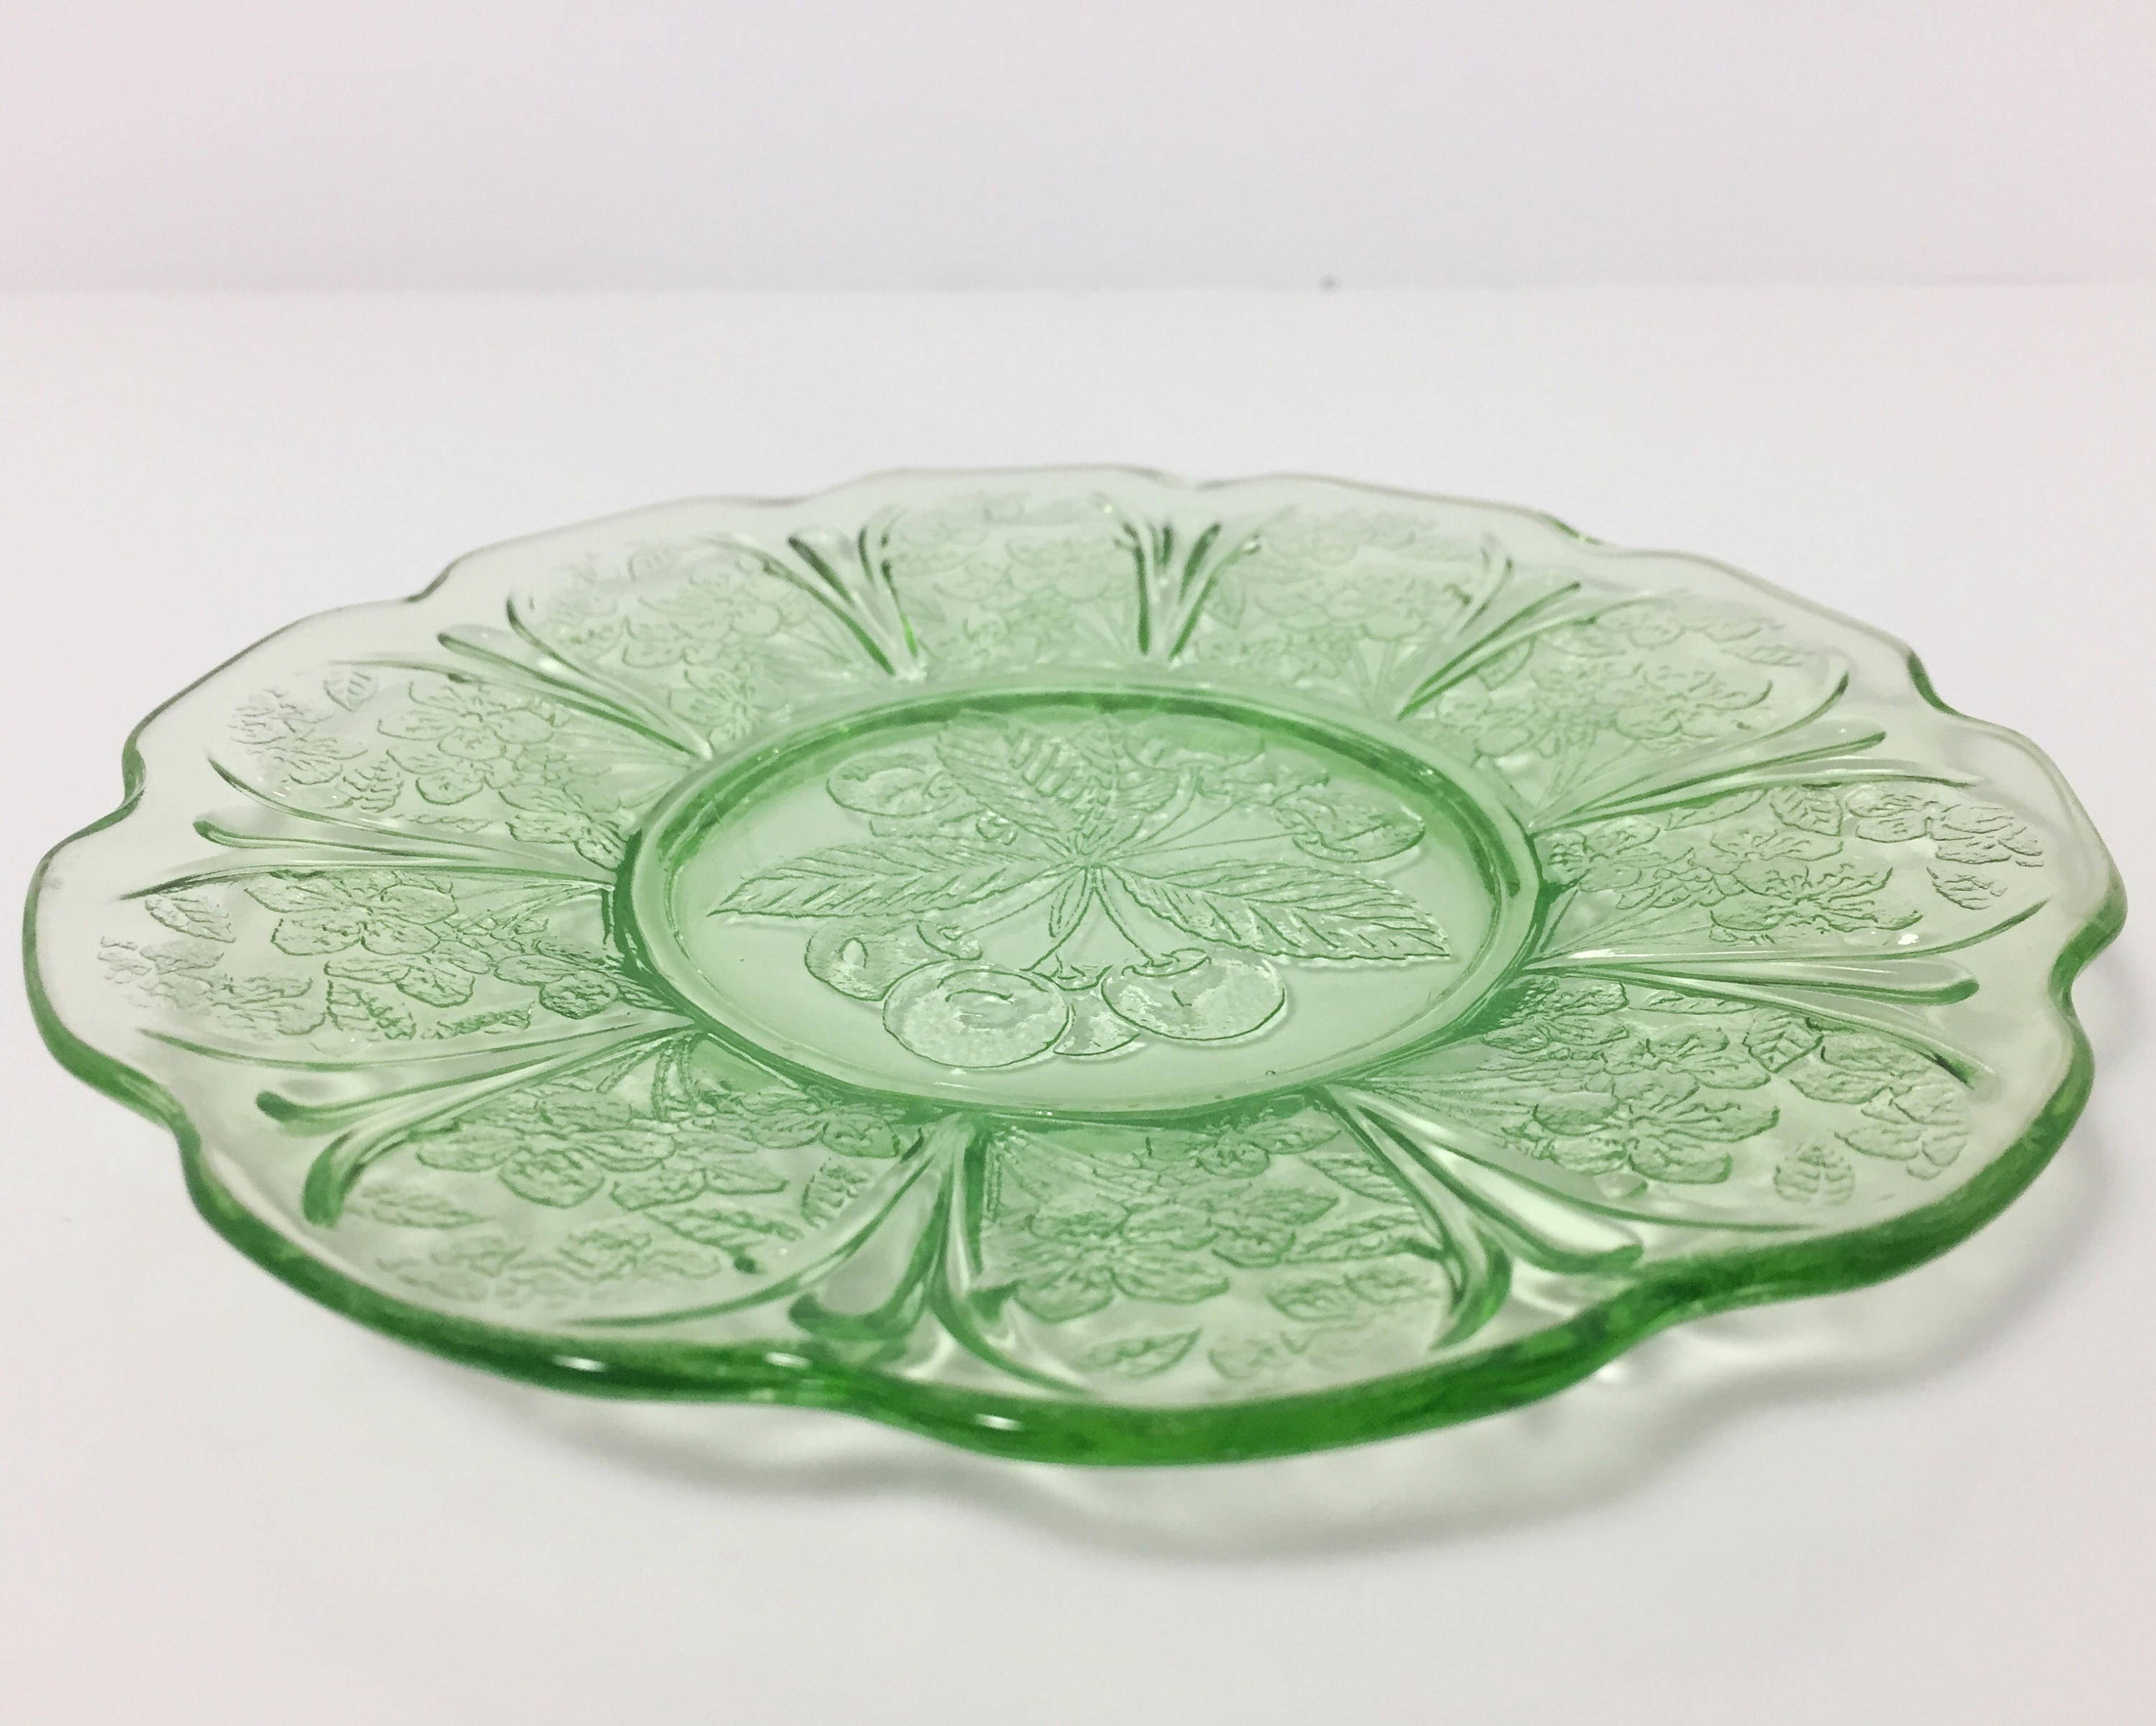 Green depression glass divided plates